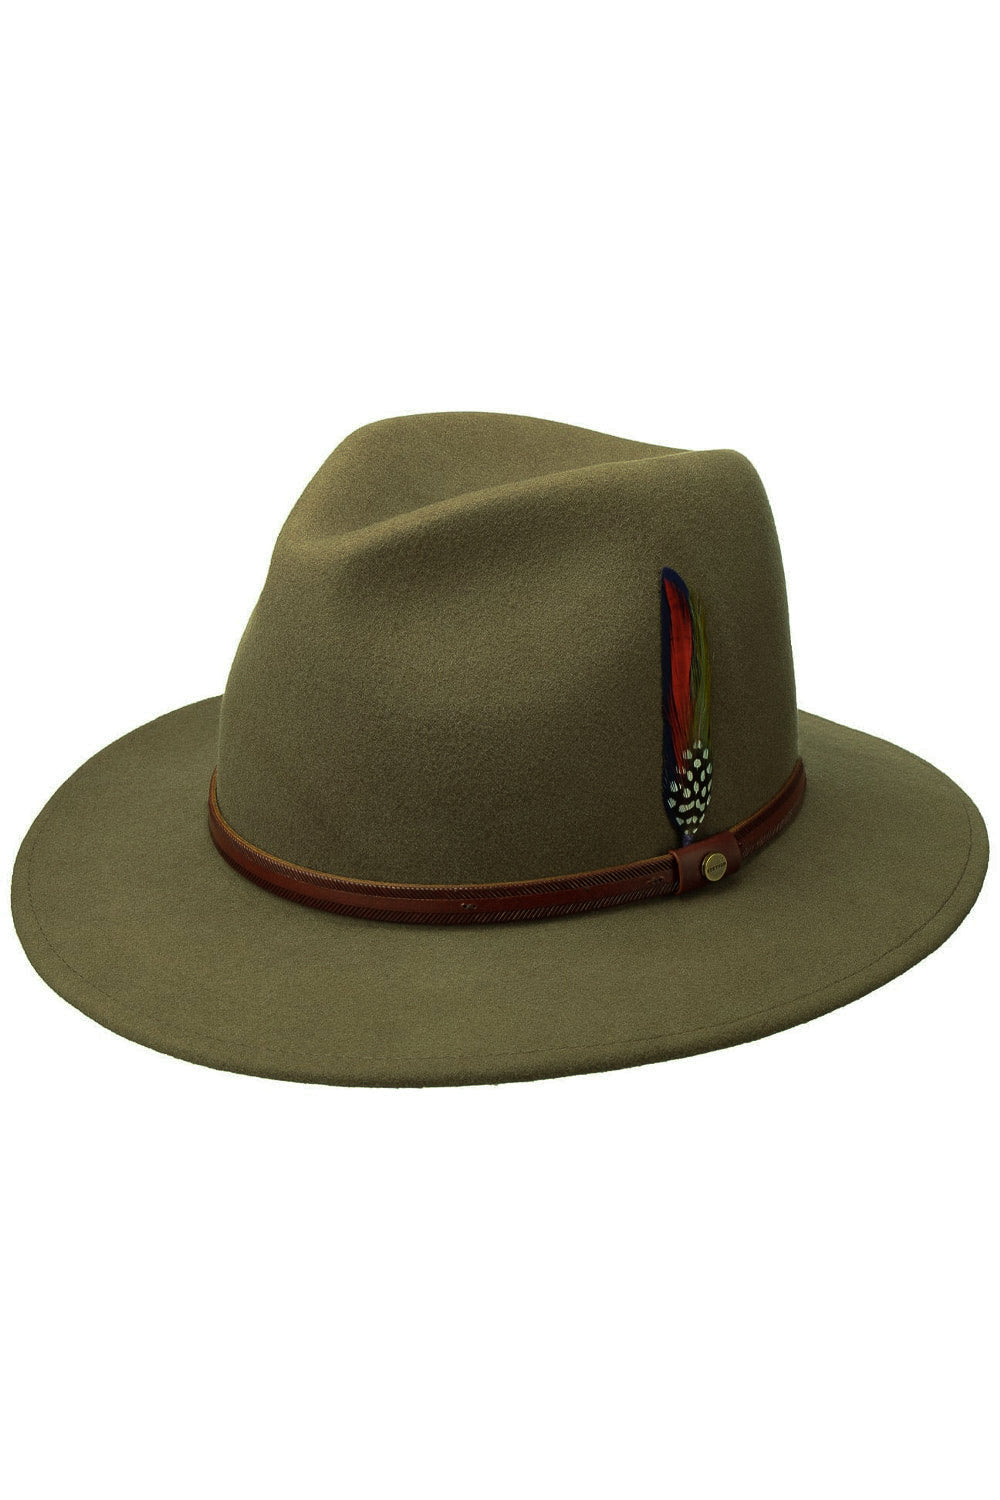 Buy the Stetson Rantoul Traveller Hat in Khaki at Intro. Spend £50 for free UK delivery. Official stockists. We ship worldwide.